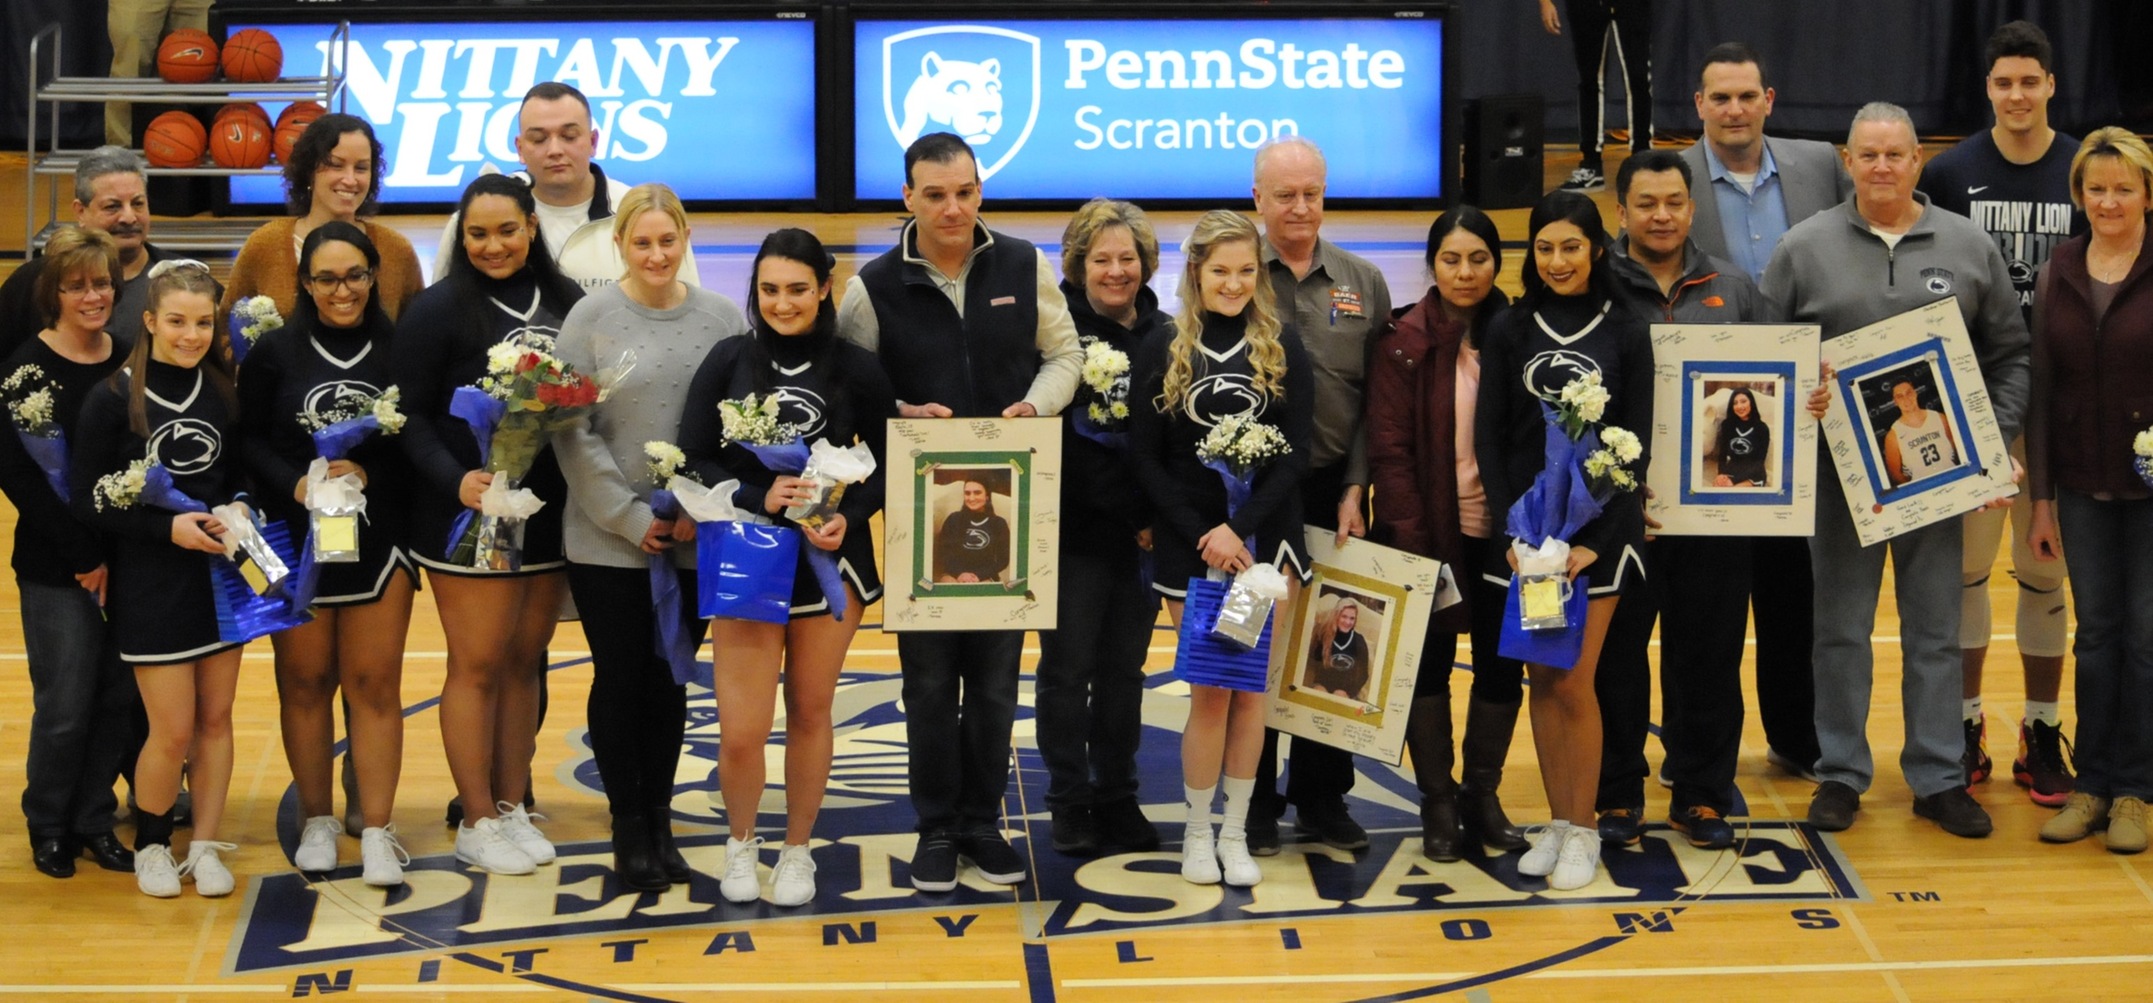 Photo / Deyniel Desarden (sophomore-corporate communications)
PSU Scranton Seniors, alone with their coaches and parents, celebrate Senior Night before the men's basketball victory over PSU Lehigh Valley on Tuesday night.